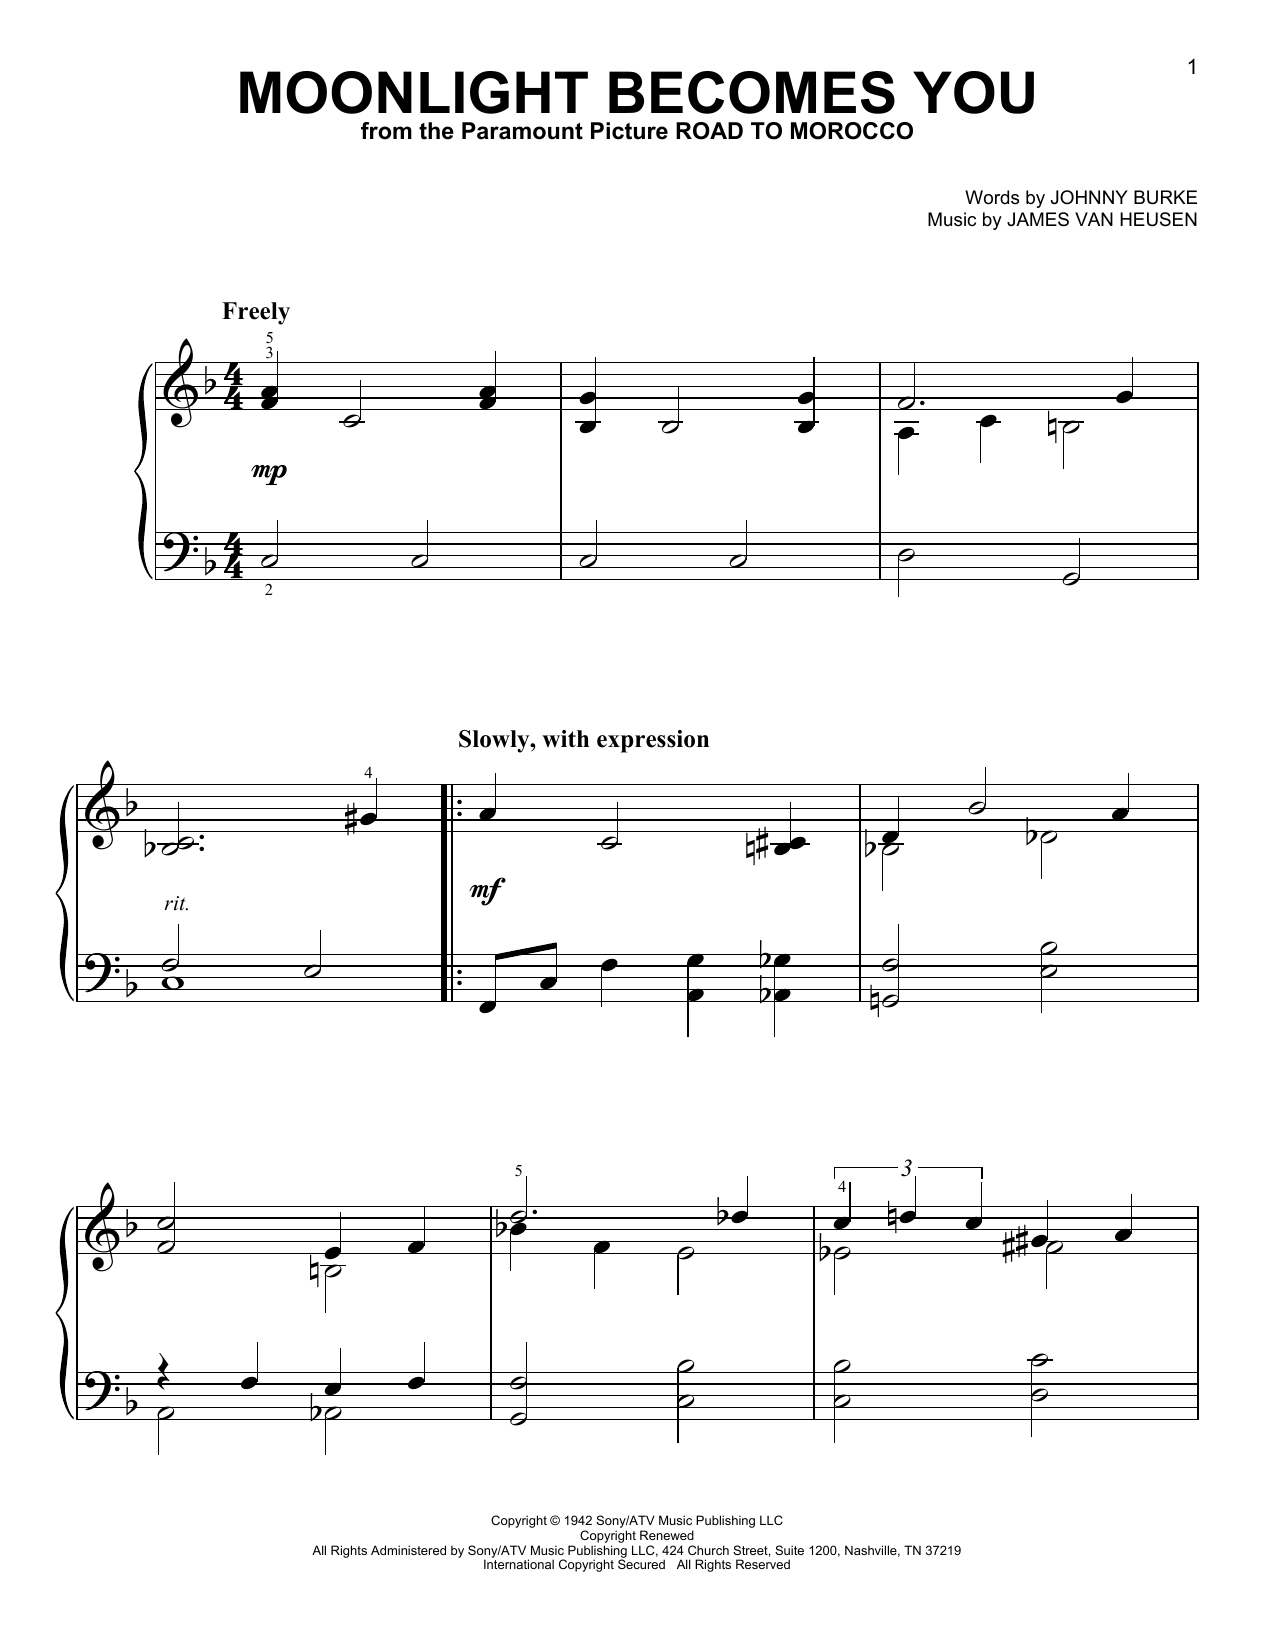 Jimmy Van Heusen Moonlight Becomes You sheet music preview music notes and score for E-Z Play Today including 2 page(s)